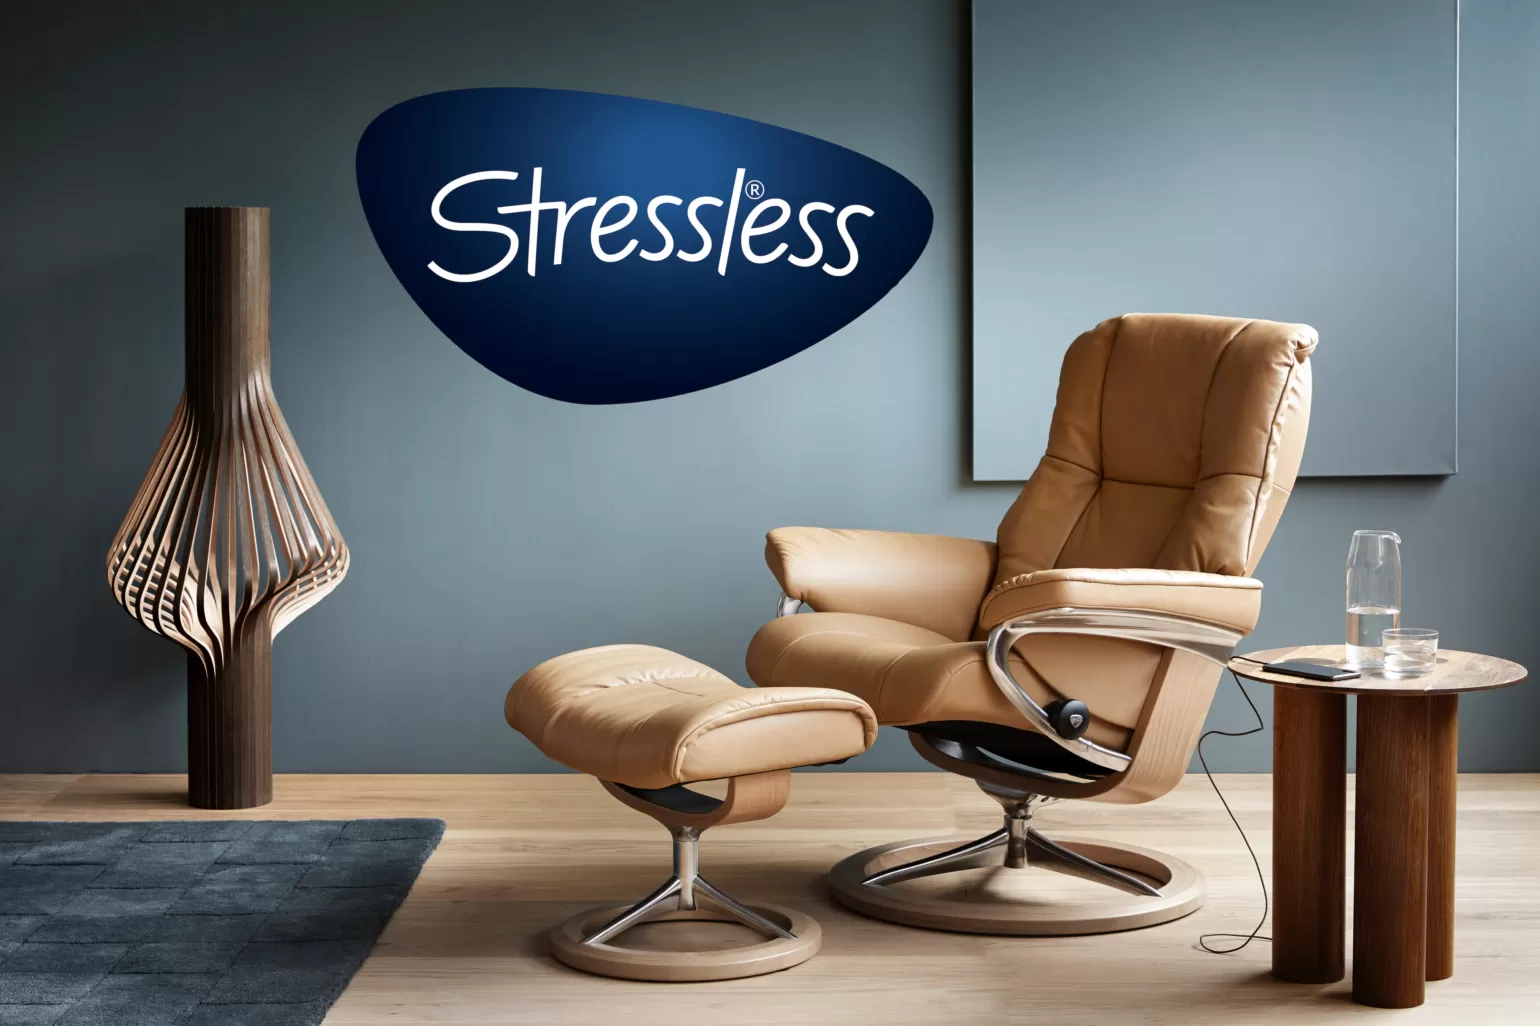 When Ekornes® was founded in 1934, we set out to change the way people think about comfort. Nothing exemplifies that more than our Stressless® furniture line. We believe being comfortable is based on the right fit, to your body and to your home. Most of our Stressless® styles are available in multiple sizes so the furniture feels tailored to your body, and the many design possibilities will ensure it also feels tailored to your room design. Our innovative comfort systems allow the furniture to seamlessly move with your body by simply turning the Glide wheel and shifting your weight, and they provide complete support to your head, neck and back in any position. Stressless® furniture is designed to offer an entirely new level of comfort to serious comfort enthusiasts. Today Stressless is proud to carry the endorsement of the American Chiropractic Association for it's ultimate comfort and backcare support. Stressless. The Innovators of Comfort.
